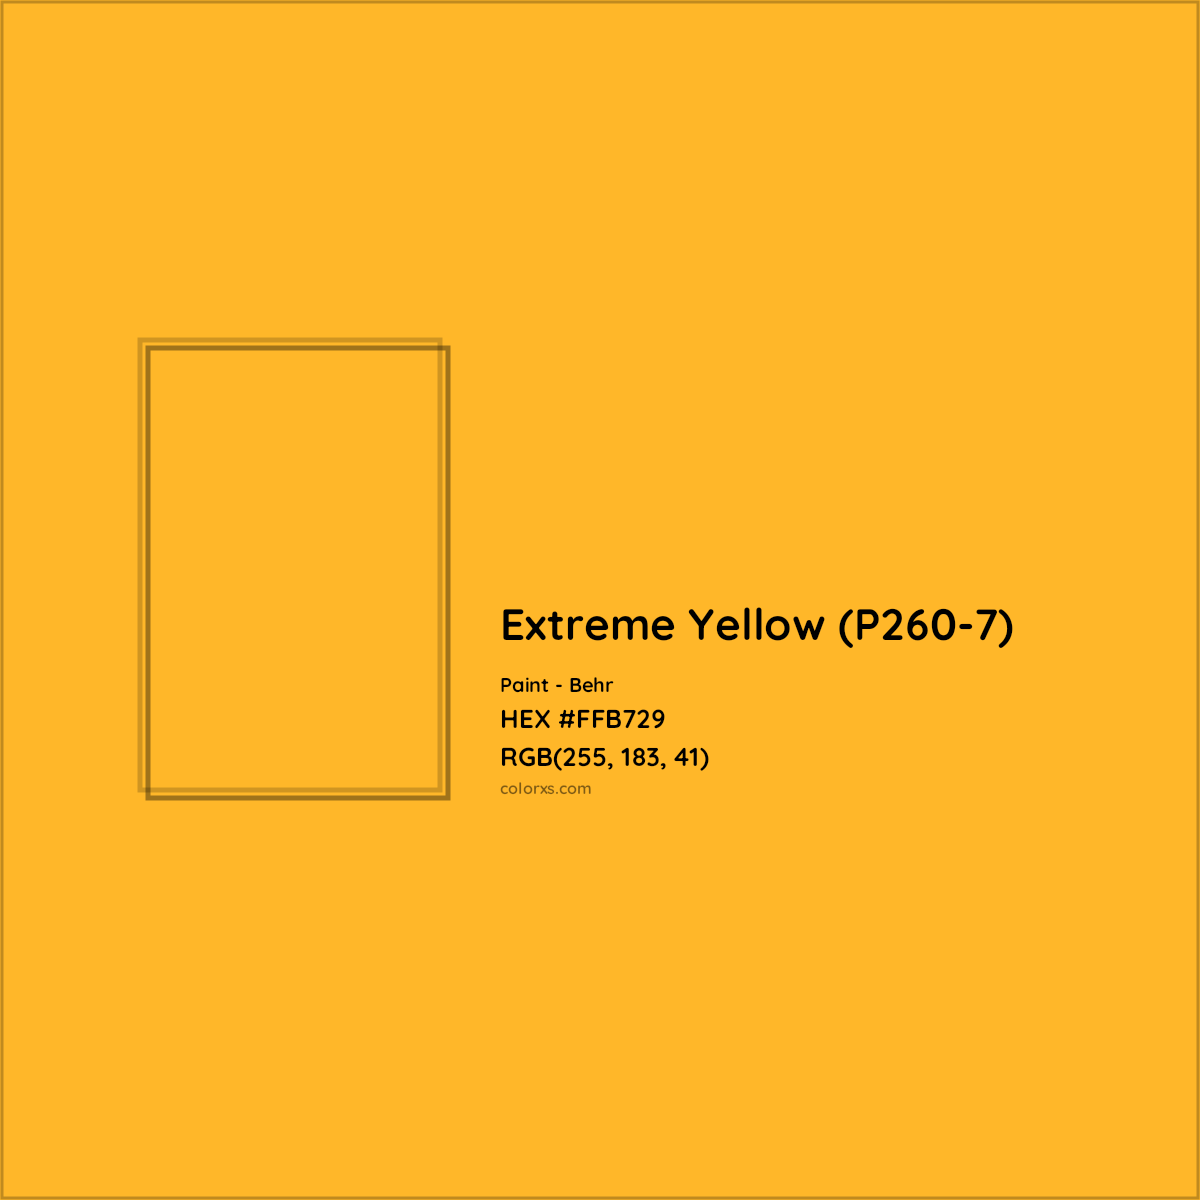 HEX #FFB729 Extreme Yellow (P260-7) Paint Behr - Color Code